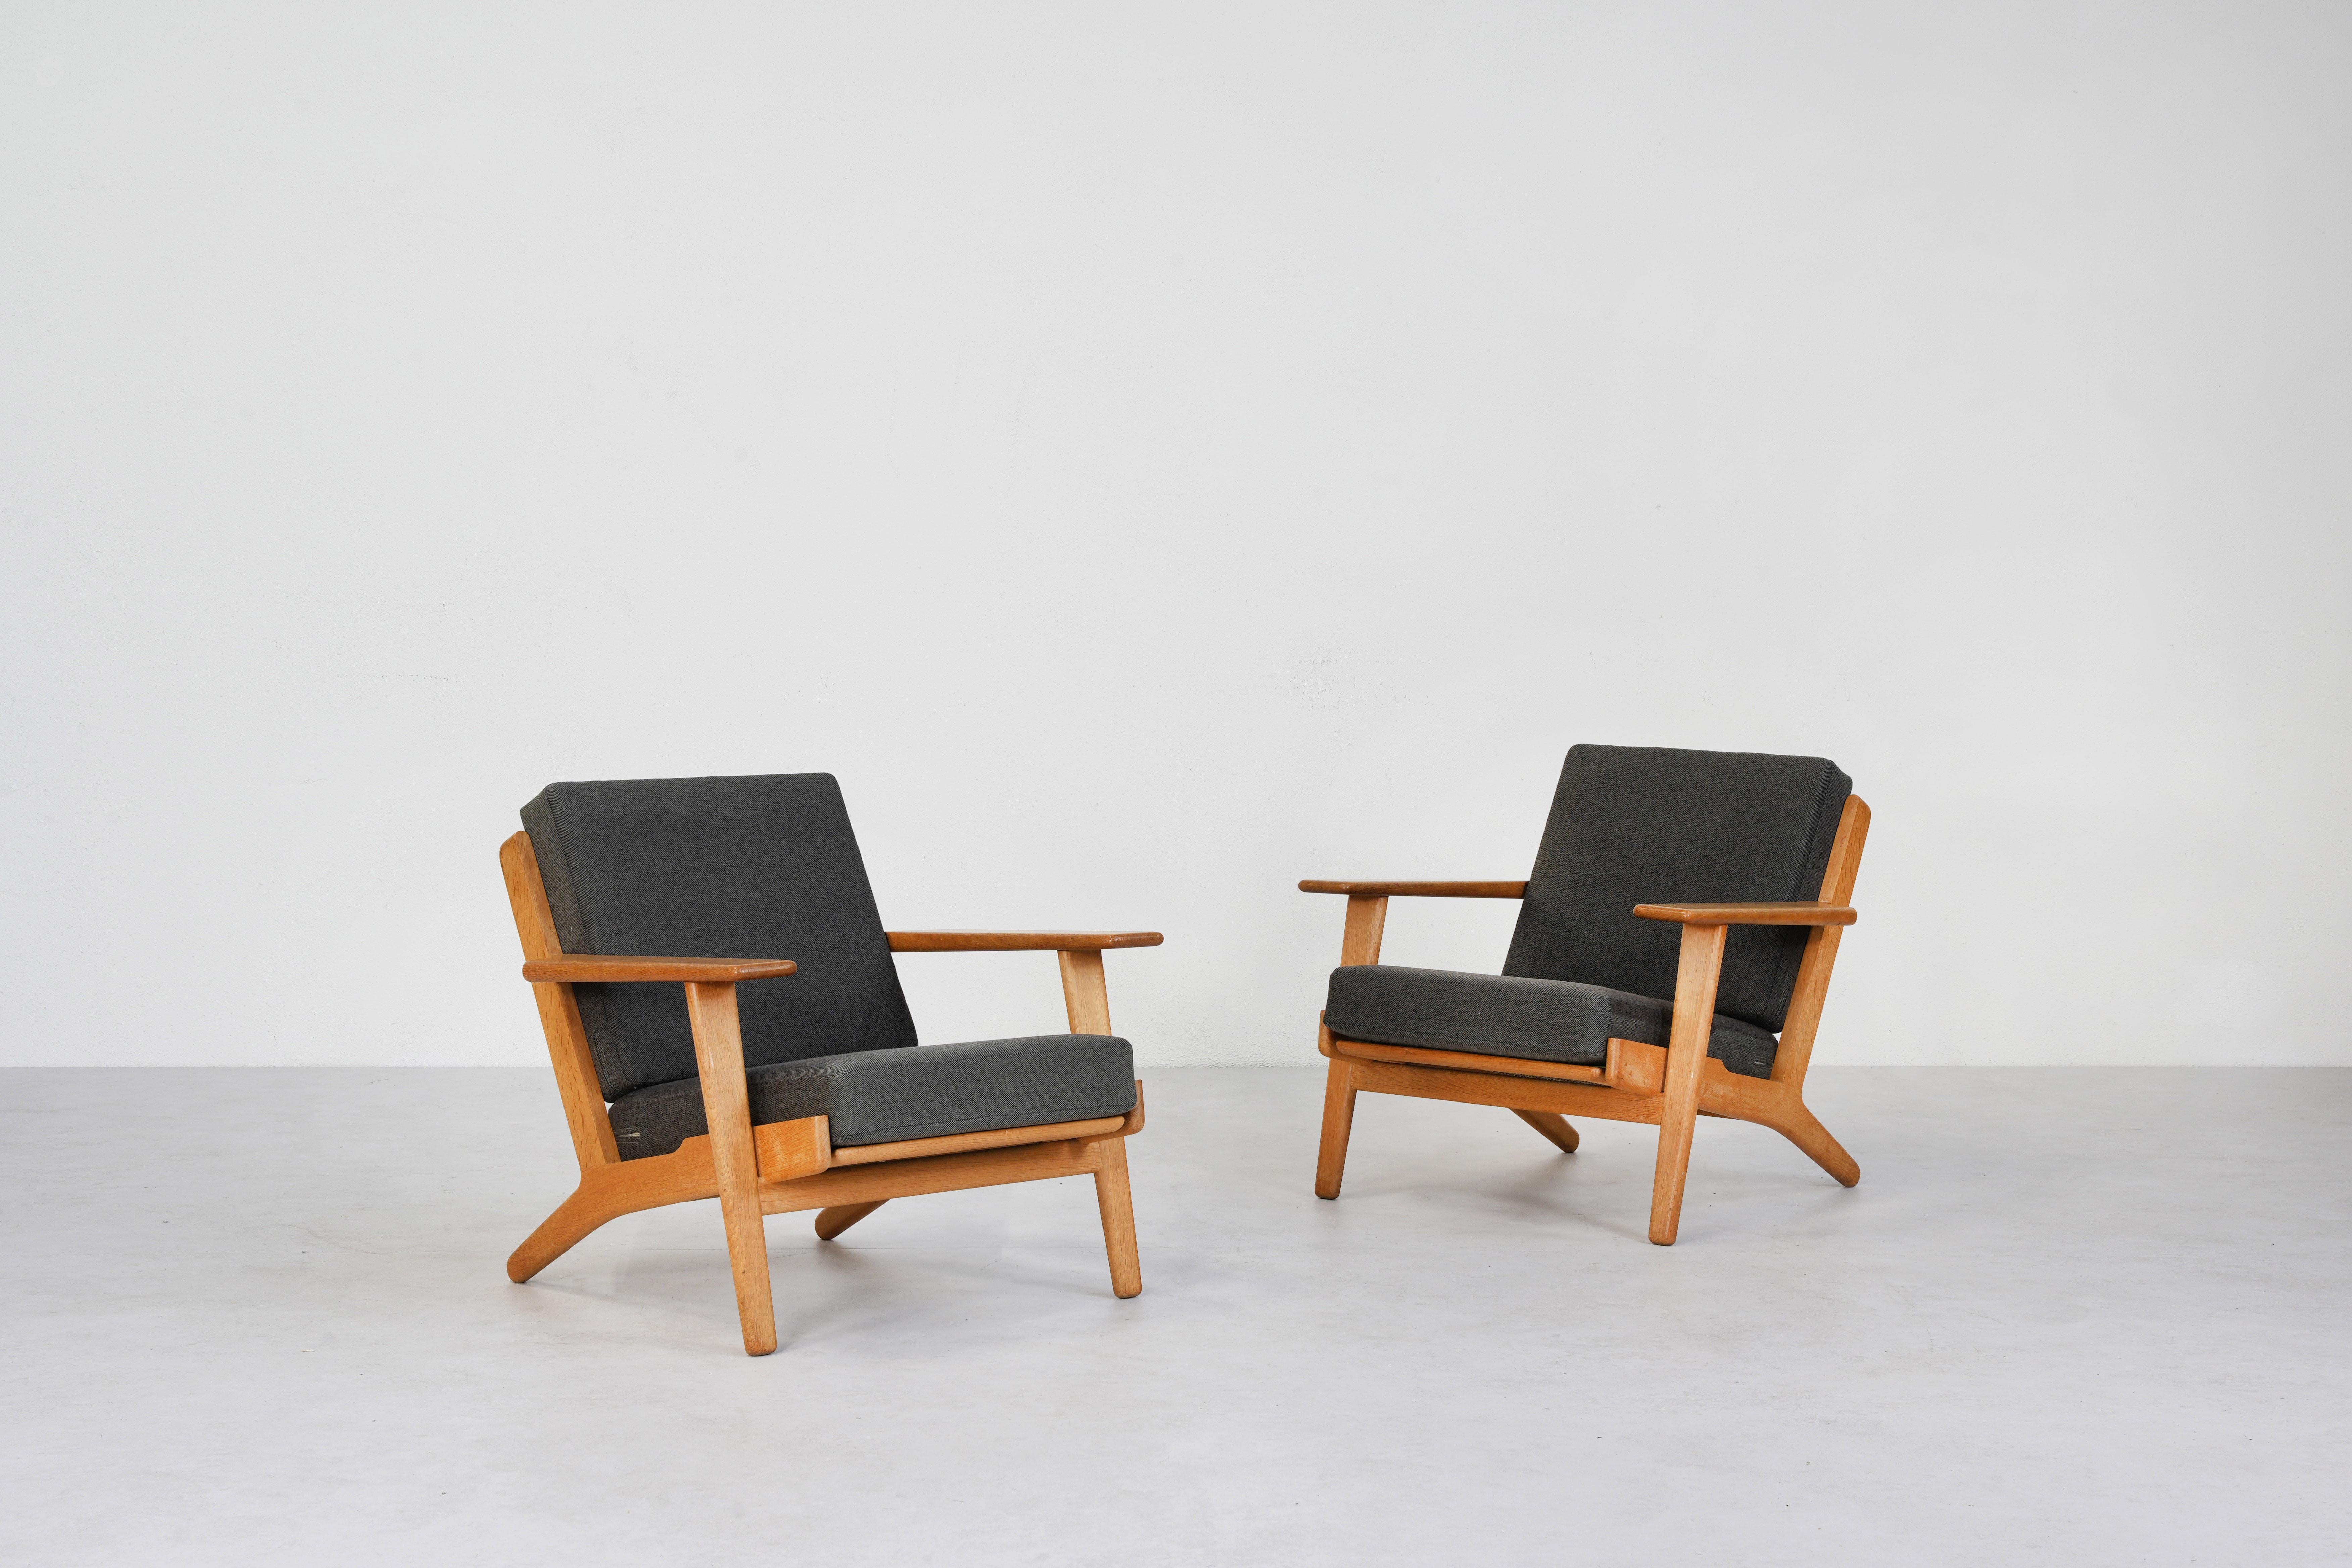 A beautiful pair of Lounge Easy Chairs designed by Hans J. Wegner for GETAMA GE 290, made in Denmark. These chairs are in excellent condition. The oakwood frame has developed a beautiful patina over time. The cushions, while still in good condition,